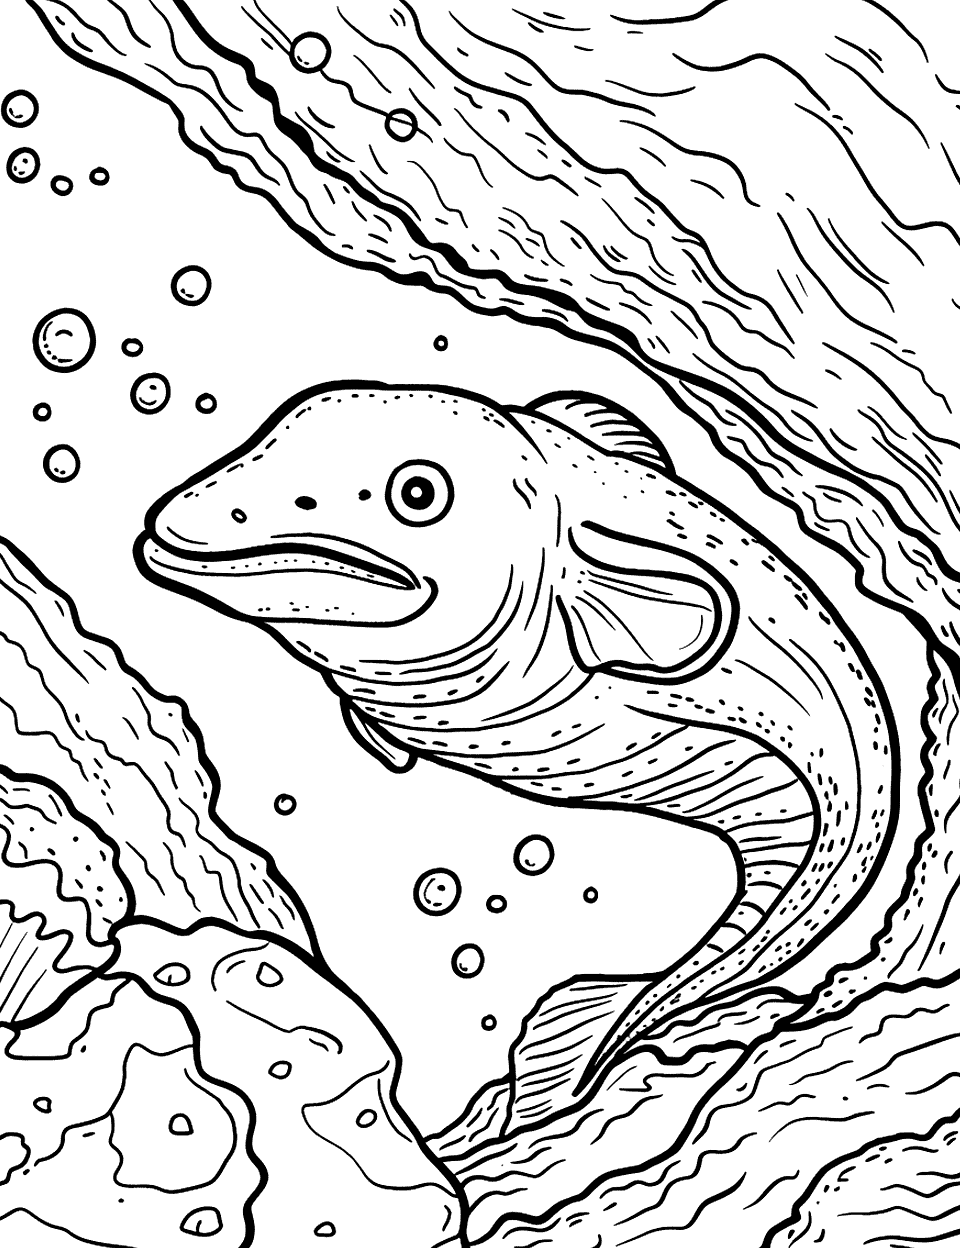 Moray Eel Peeking From a Cave Sea Creature Coloring Page - A moray eel looks out cautiously from a rocky underwater cave.